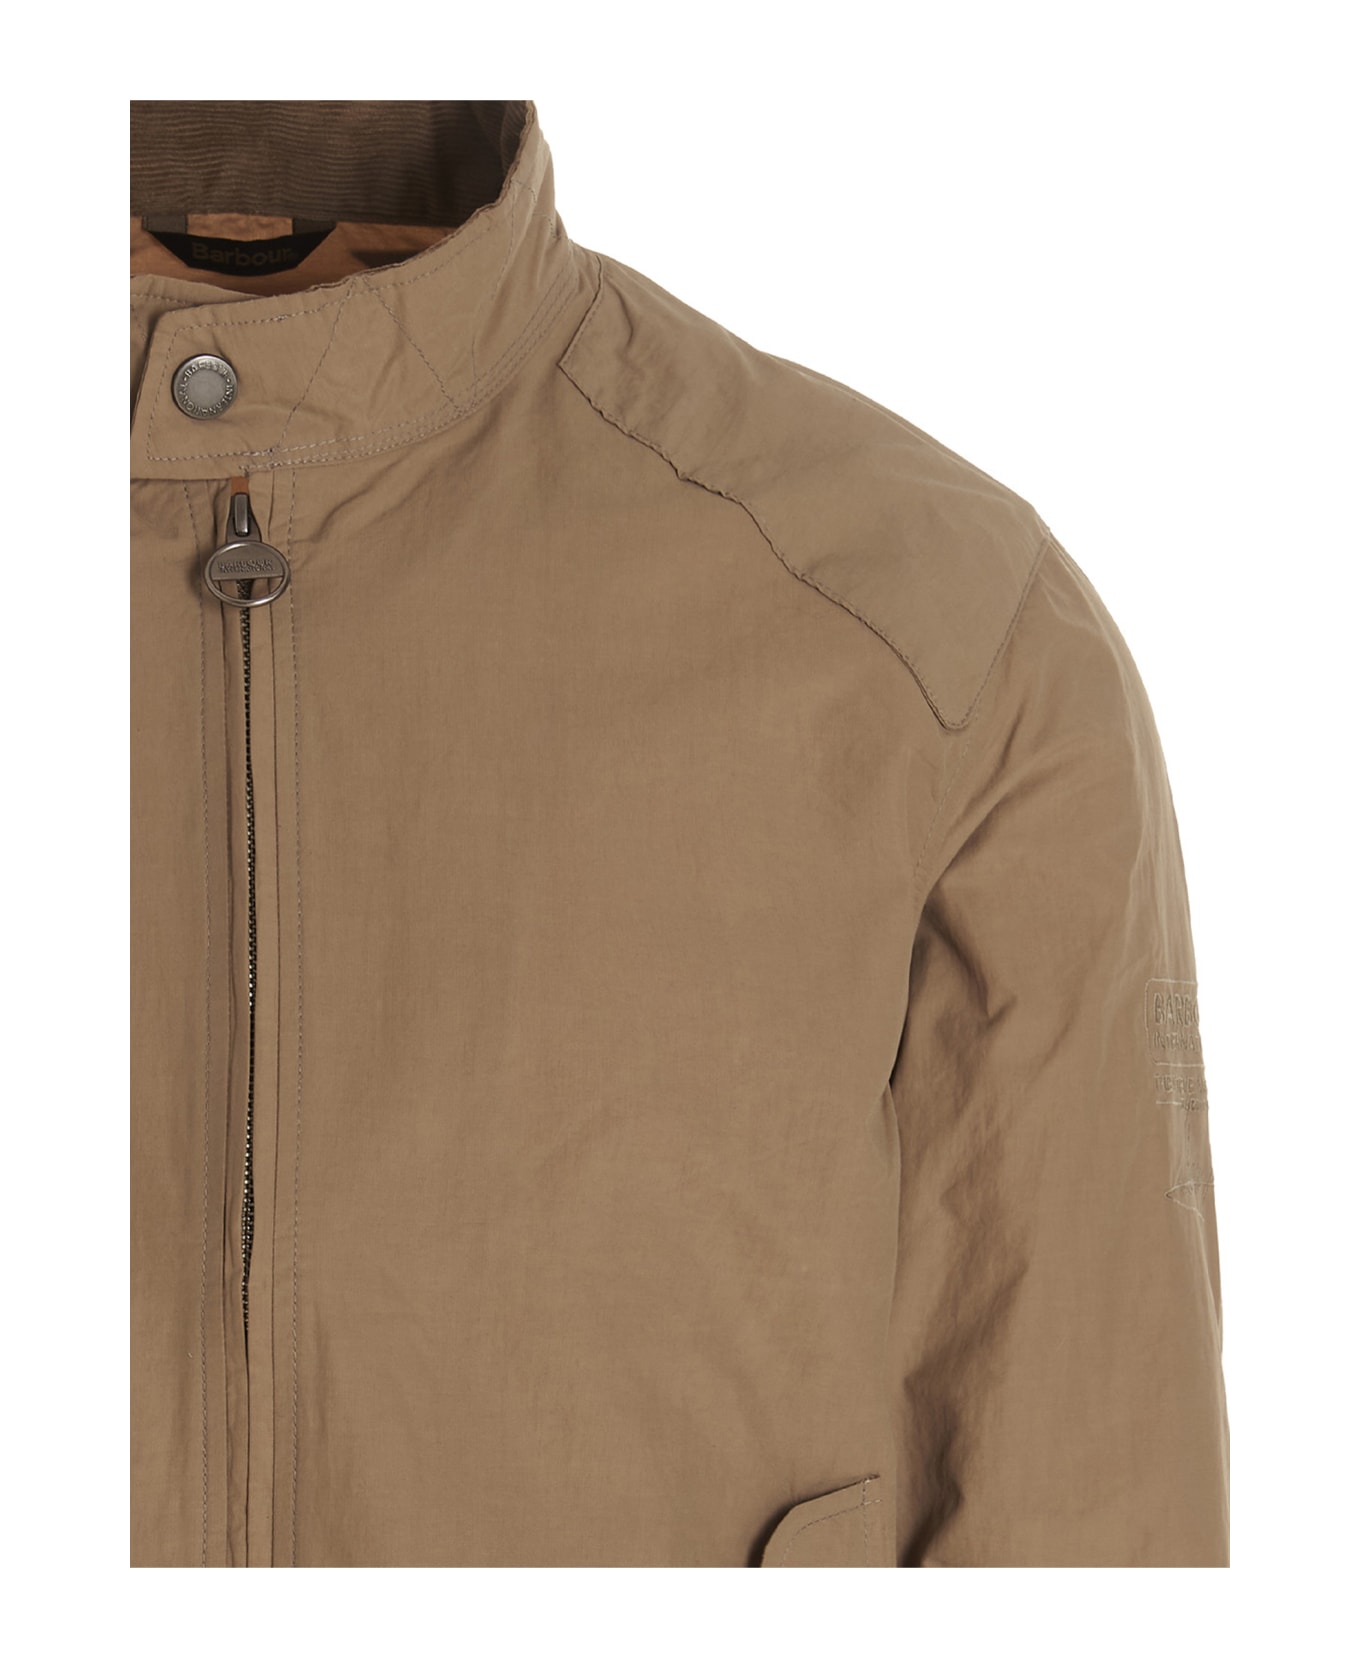 Barbour Smq Rectifier Jacket - Military Brown